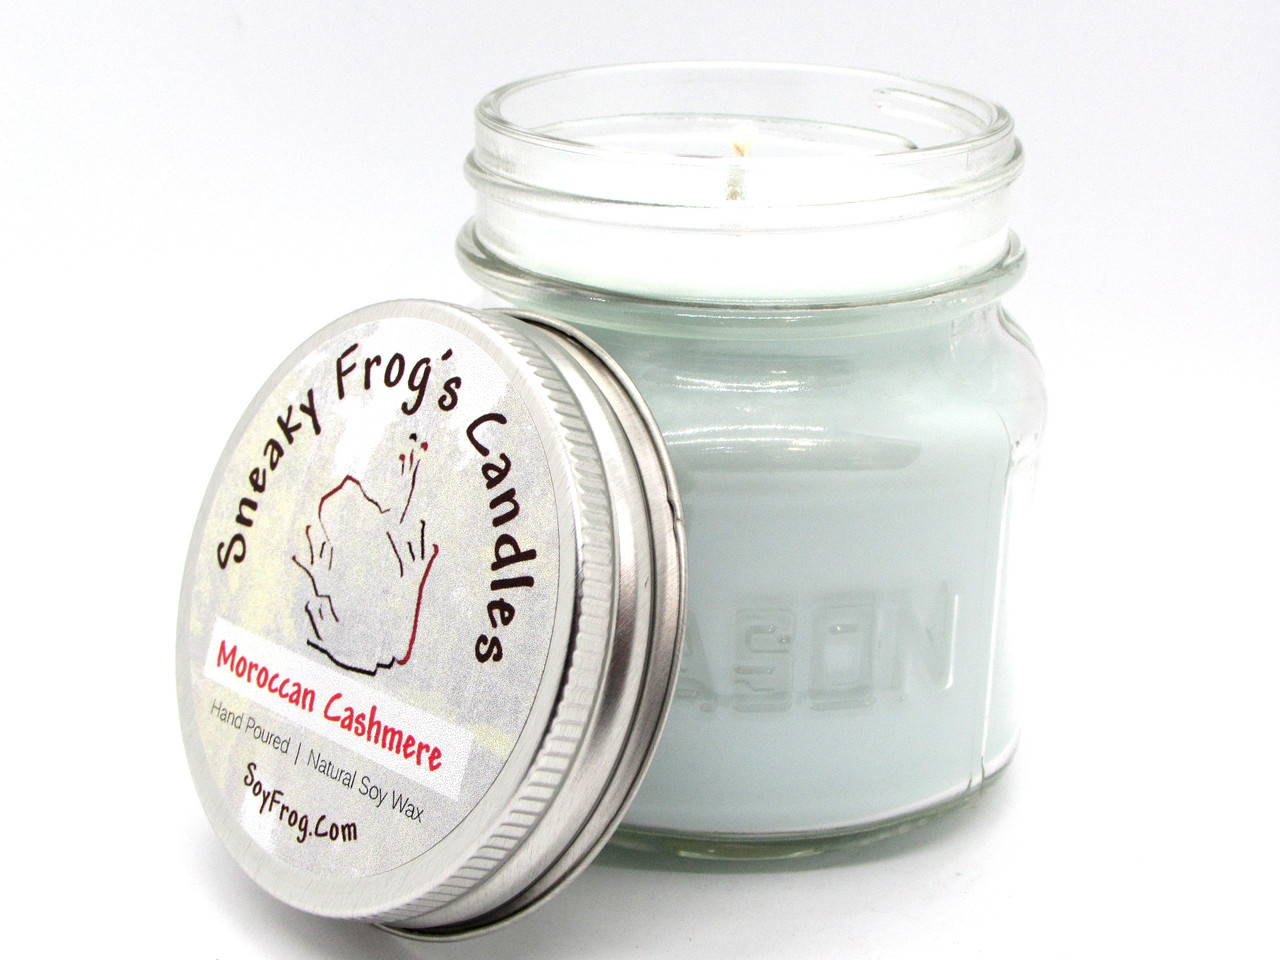 Moroccan Cashmere- Scented Natural Soy Wax Candle - 8 Oz Mason Jar